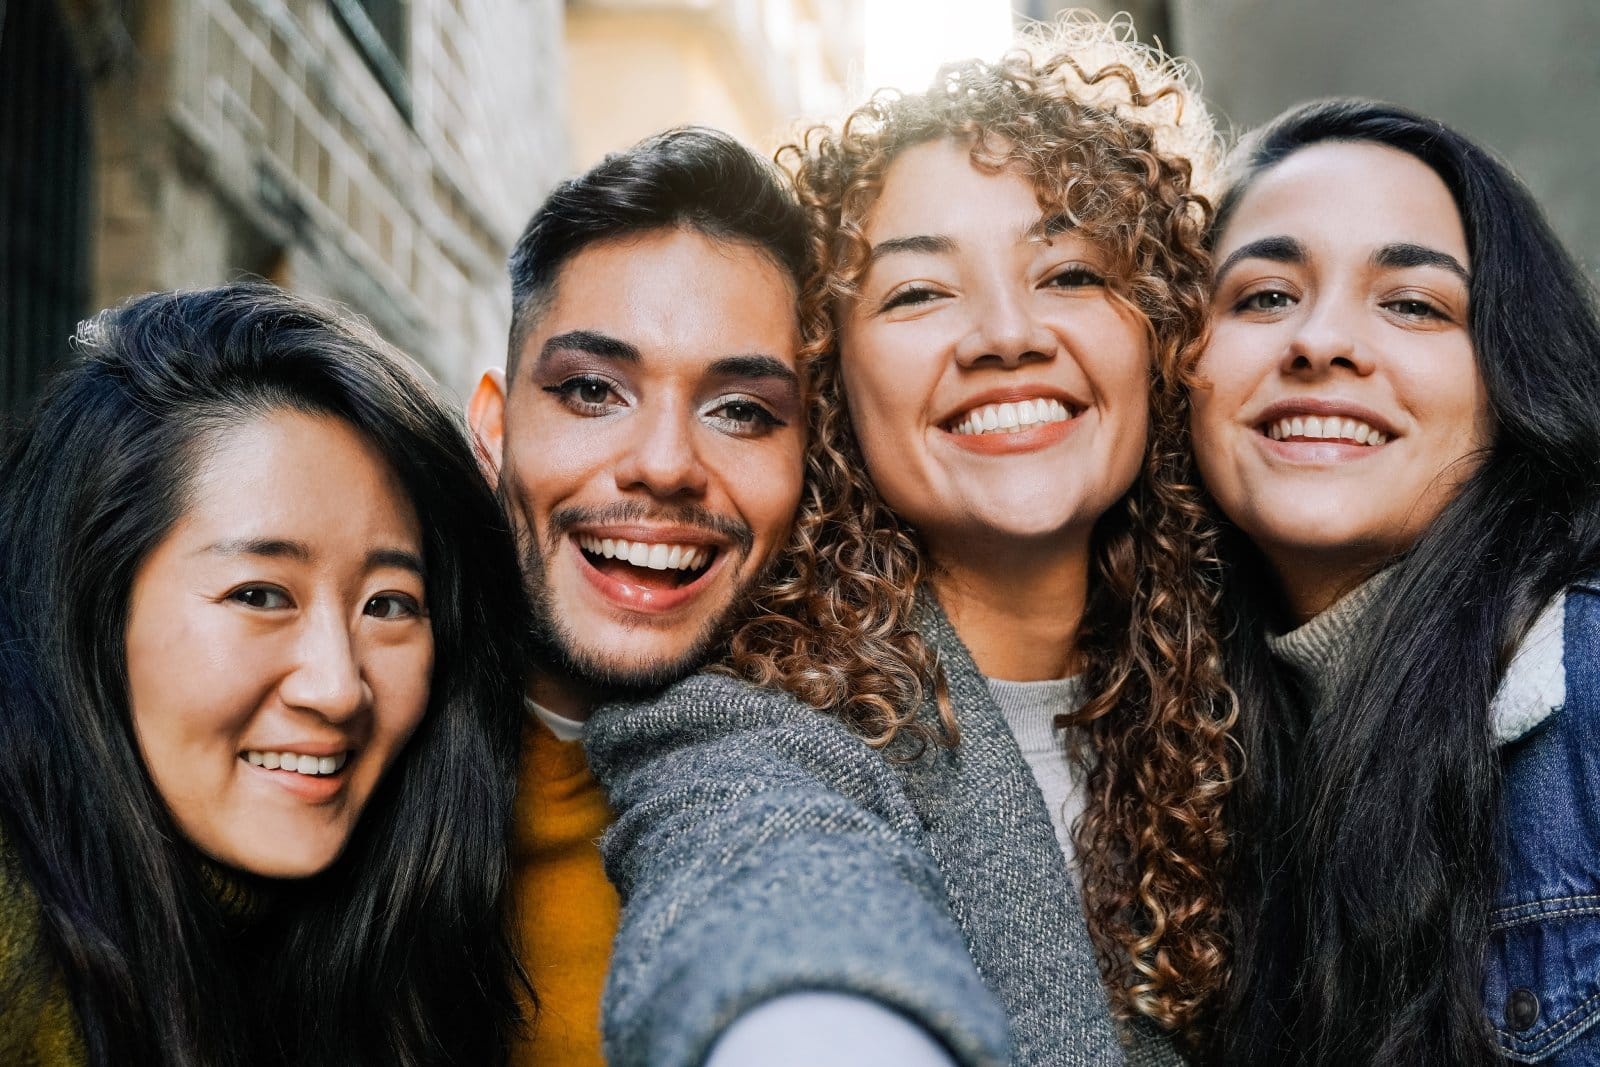 <p class="wp-caption-text">Image Credit: Shutterstock / Nuva Frames</p>  <p><span>There’s an unspoken kinship that binds LGBTQ+ travelers, a kind of “gaydar” that transcends cultural and linguistic barriers. Spotting allies in a crowd—be it through fashion choices, accessories, or the knowing glances exchanged over a crowded room—is a skill honed from necessity.</span></p>